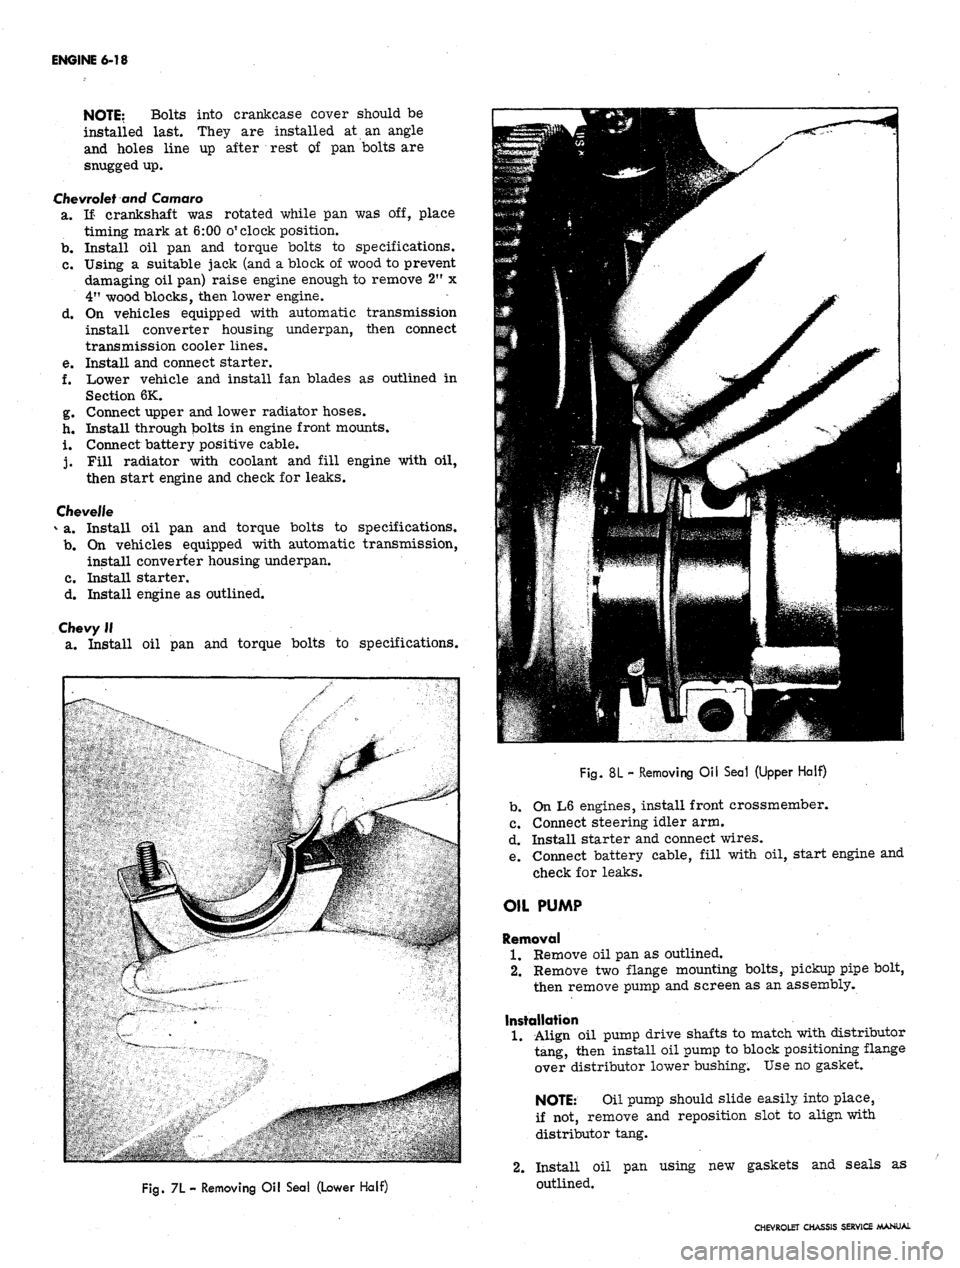 CHEVROLET CAMARO 1967 1.G Chassis Manual PDF 
ENGINE 6-18

NOTE:
 Bolts into crankcase cover should be

installed last. They are installed at an angle

and holes line up after rest of pan bolts are

snugged up.

Chevrolet and Camaro

a. If crank